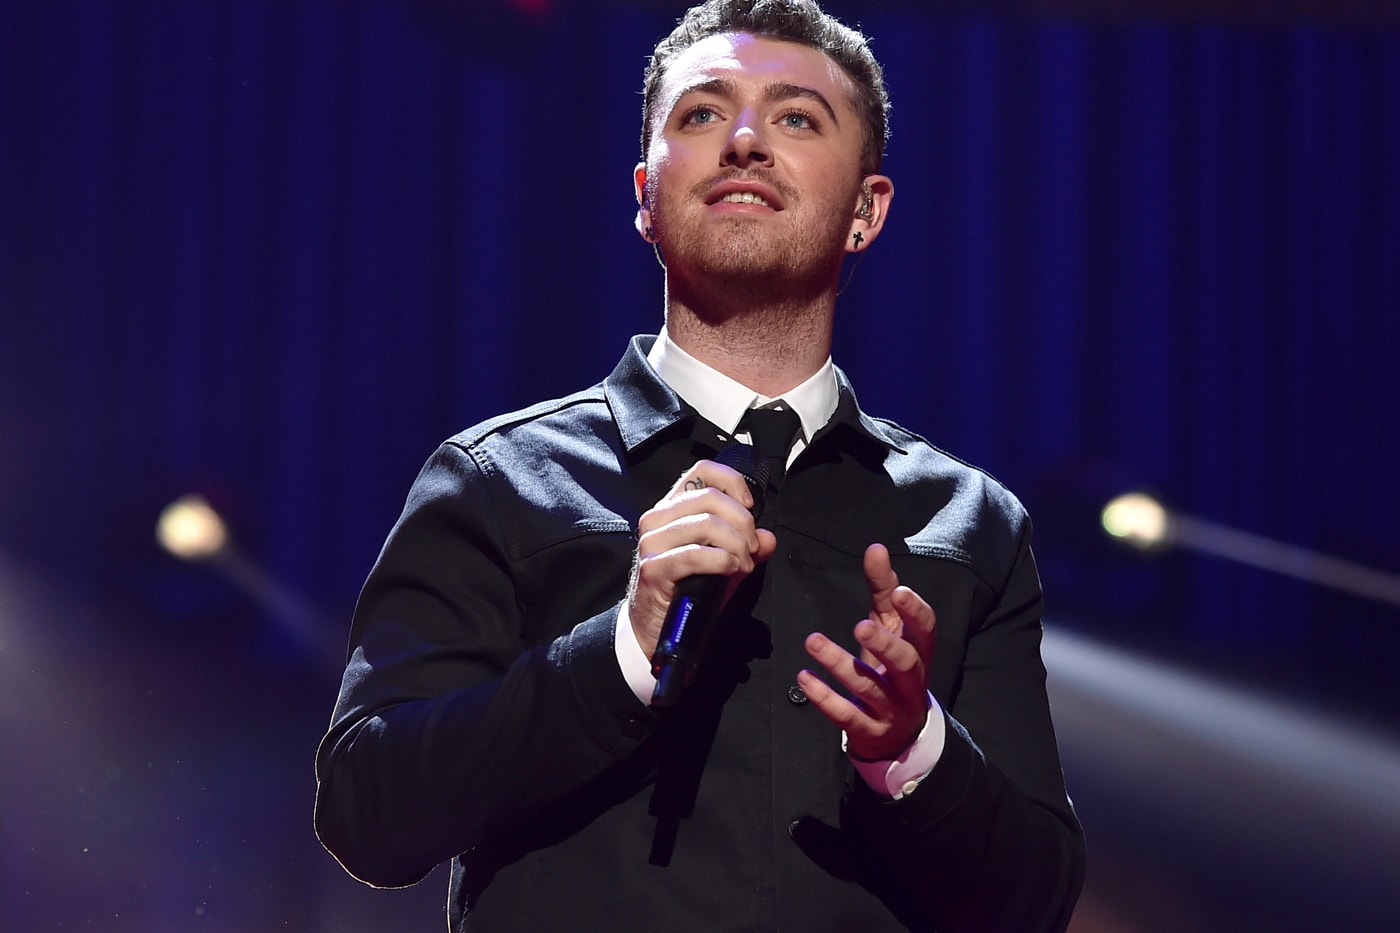 Sam Smith's "Writing's on the Wall" Wins Best Original Song at Oscars